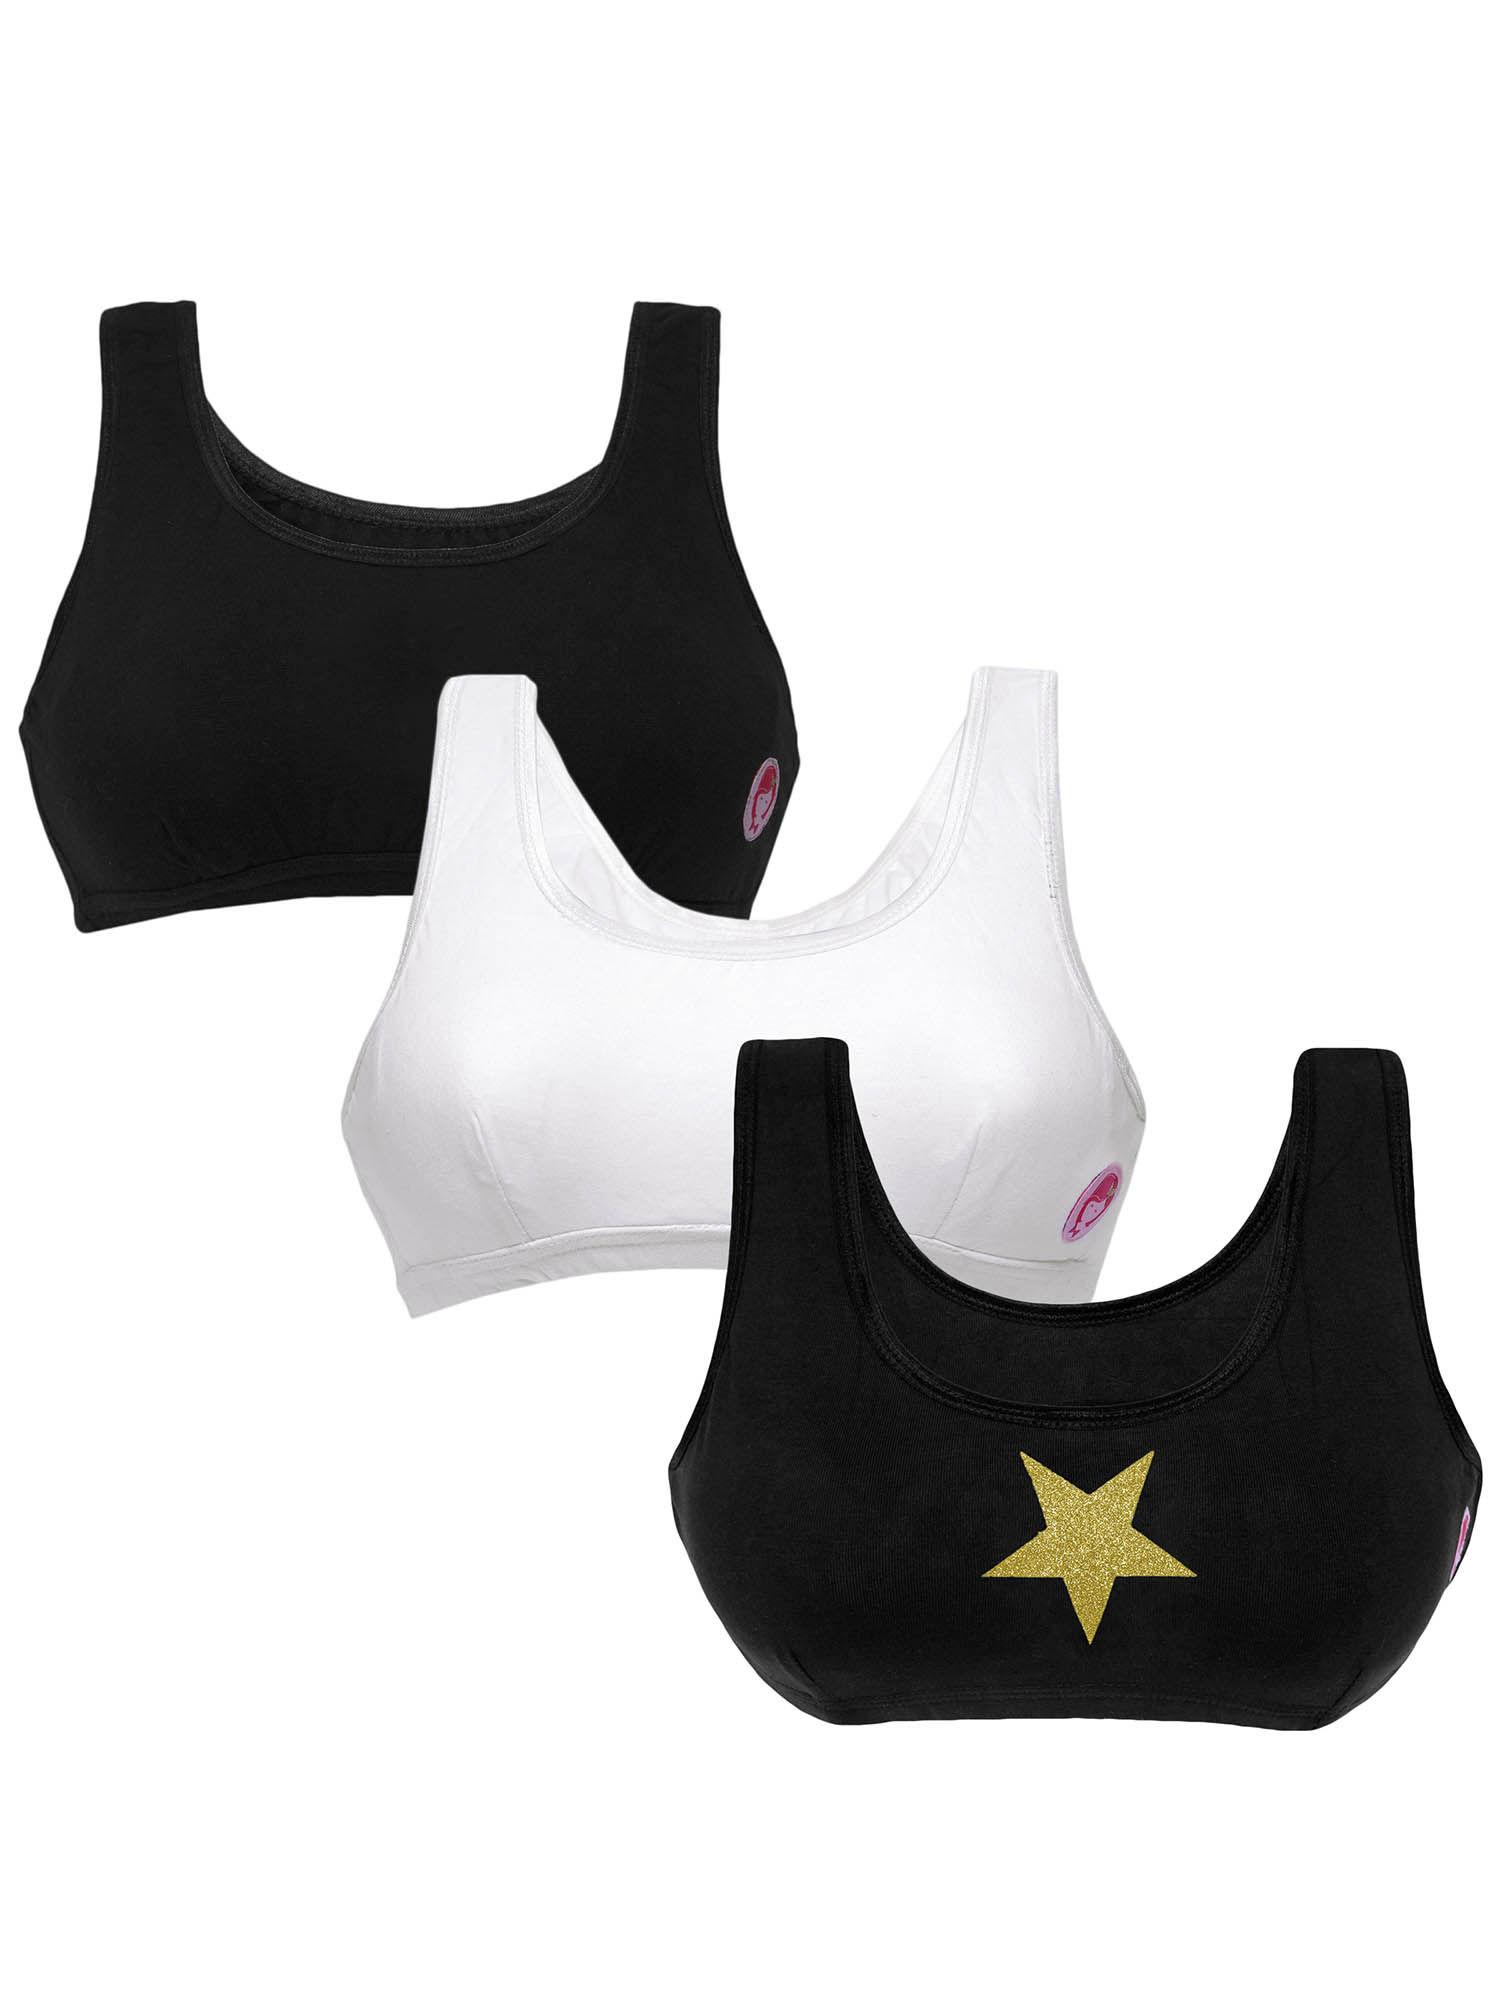 set of 3 non wired beginner/sports bras for girls black and white